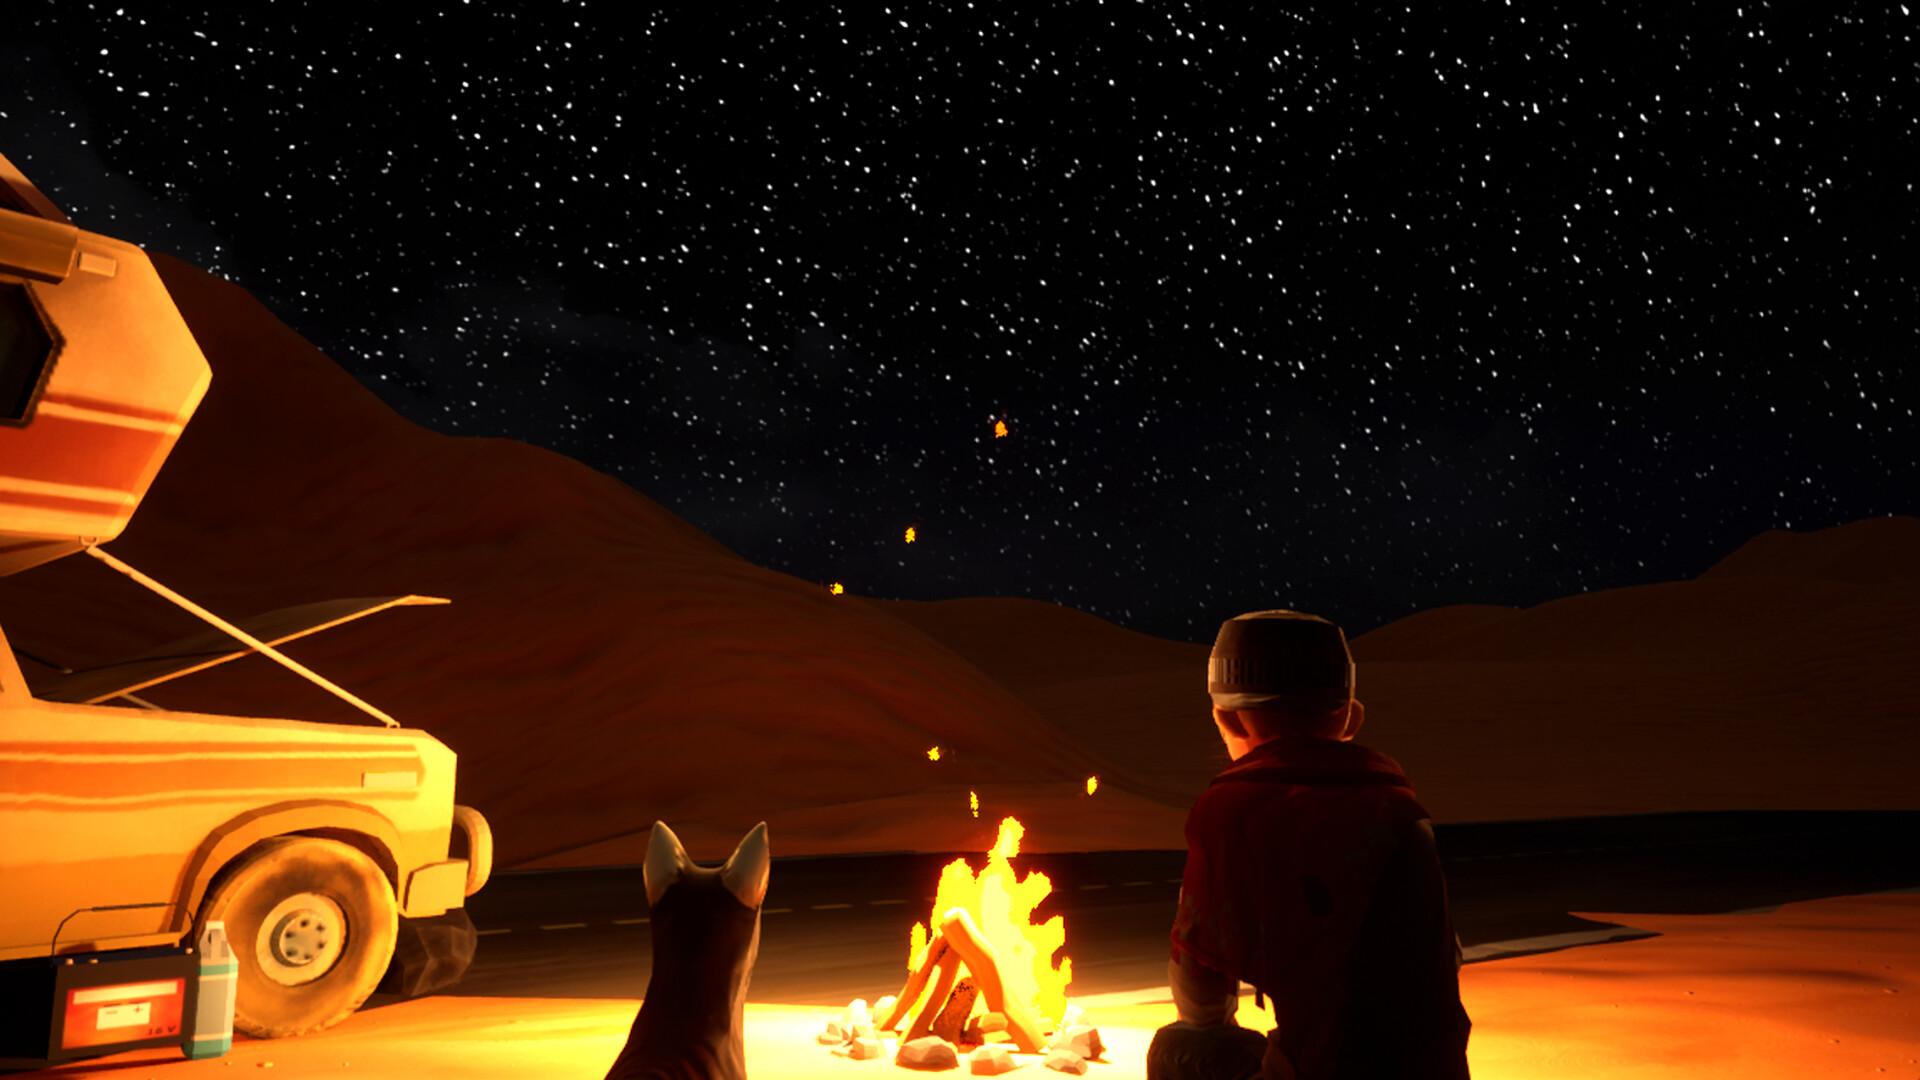 helpless - a child and a dog at a nighttime campfire